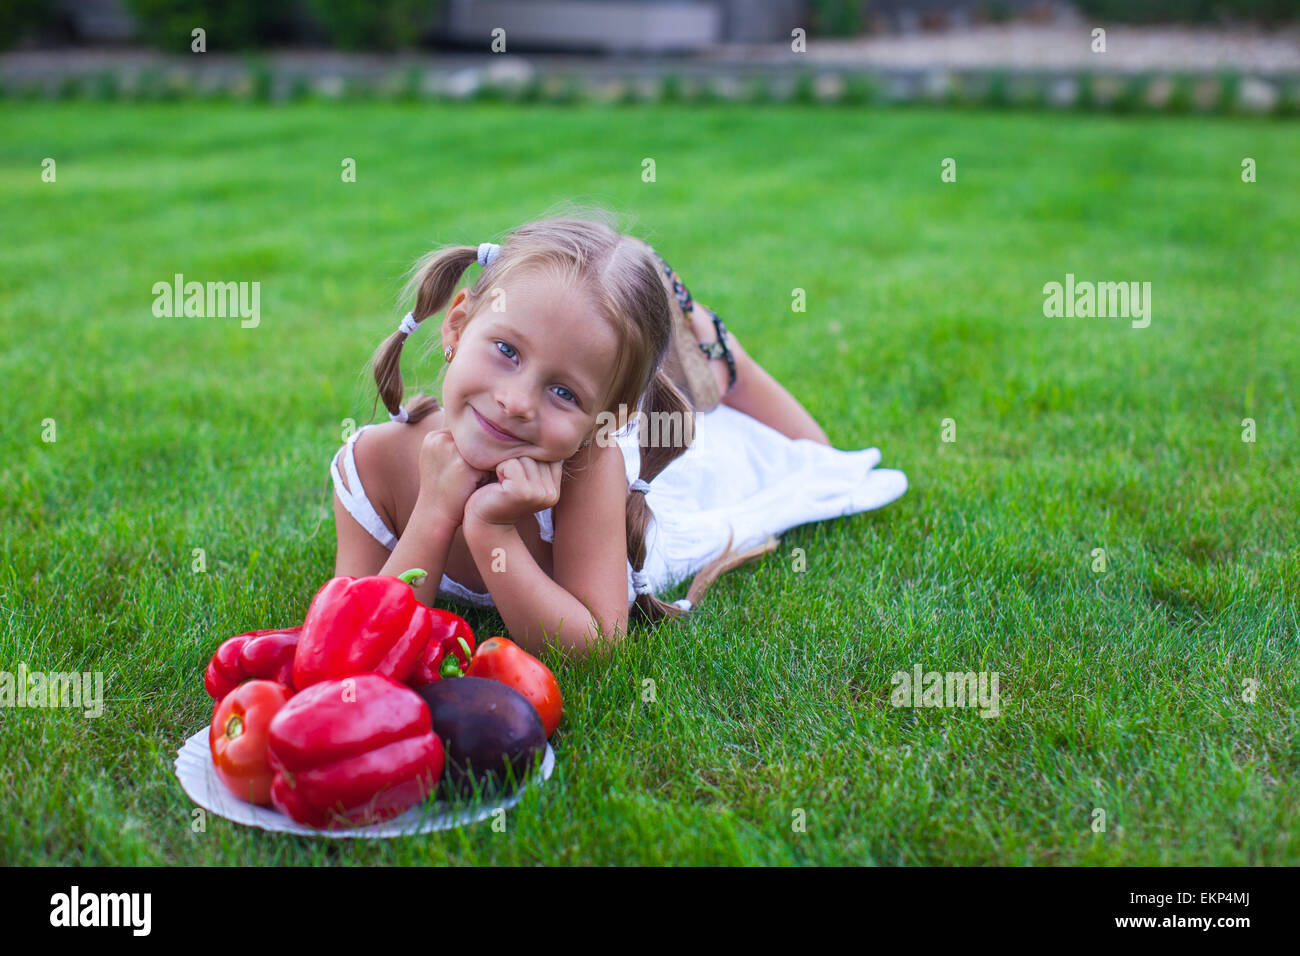 Lovely girl with pigtails in a garden with a plate of vegetables Stock Photo